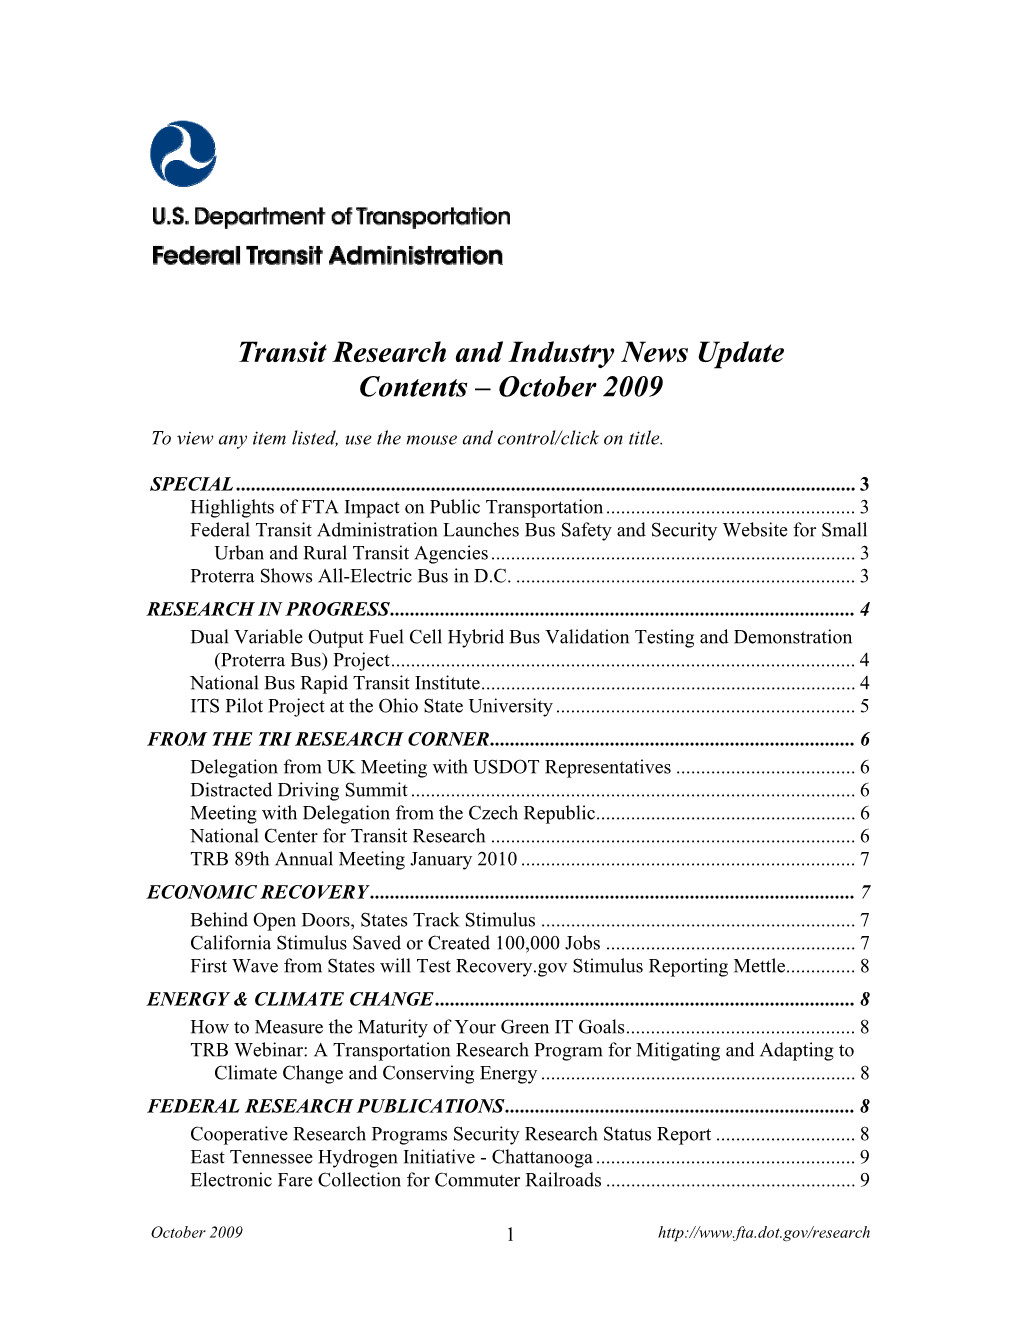 Transit Research and Industry News Update Contents – October 2009